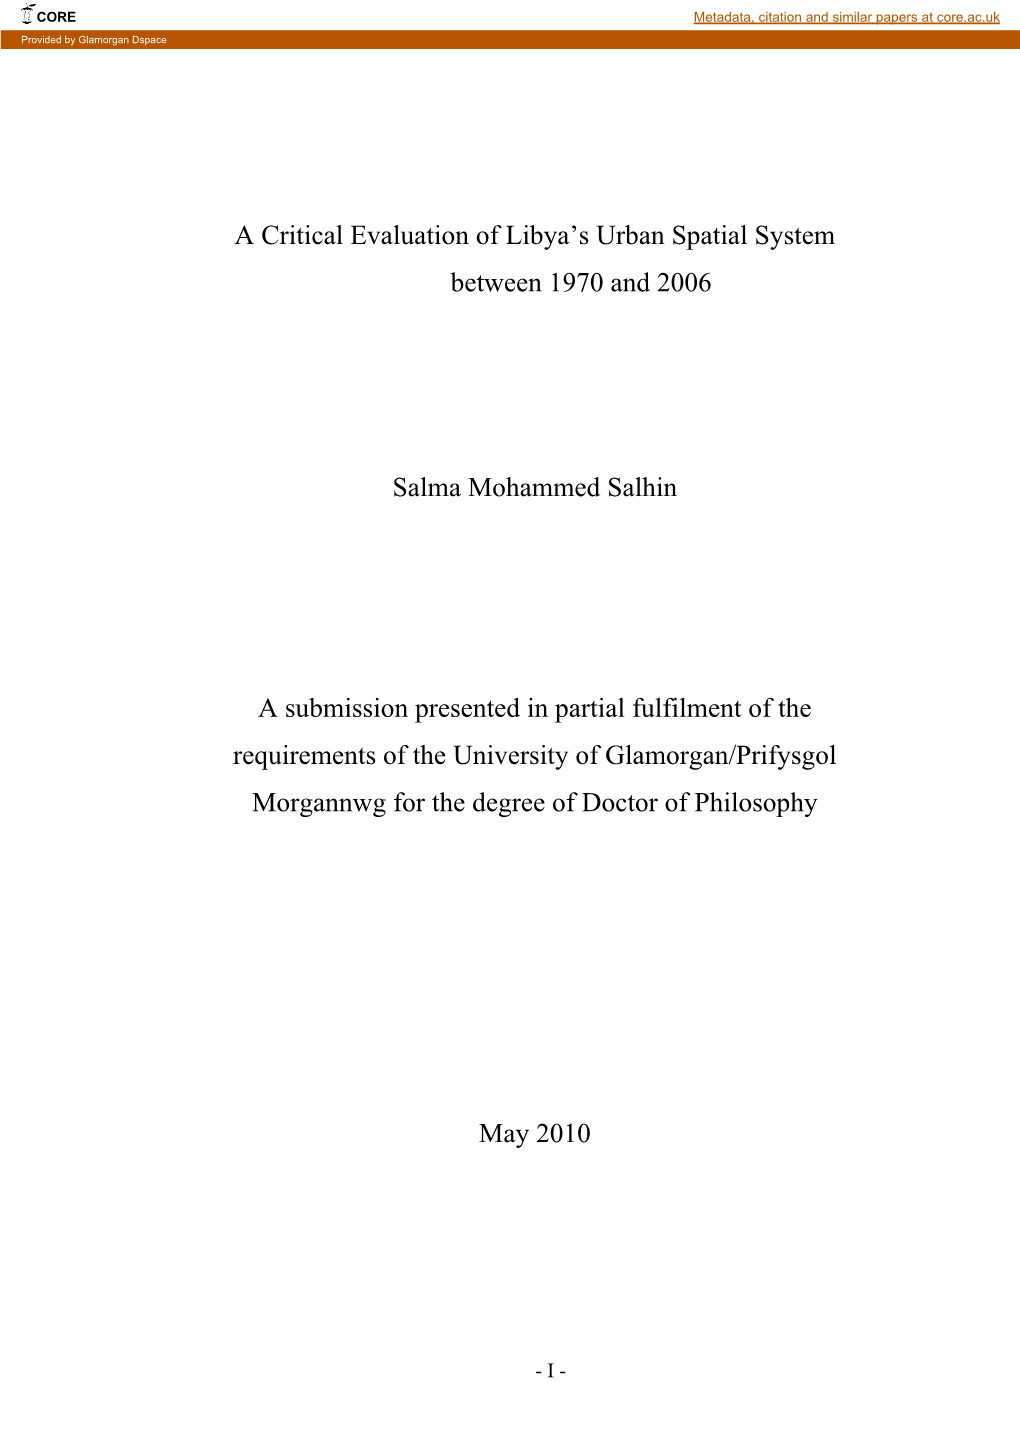 A Critical Evaluation of Libya's Urban Spatial System Between 1970 and 2006